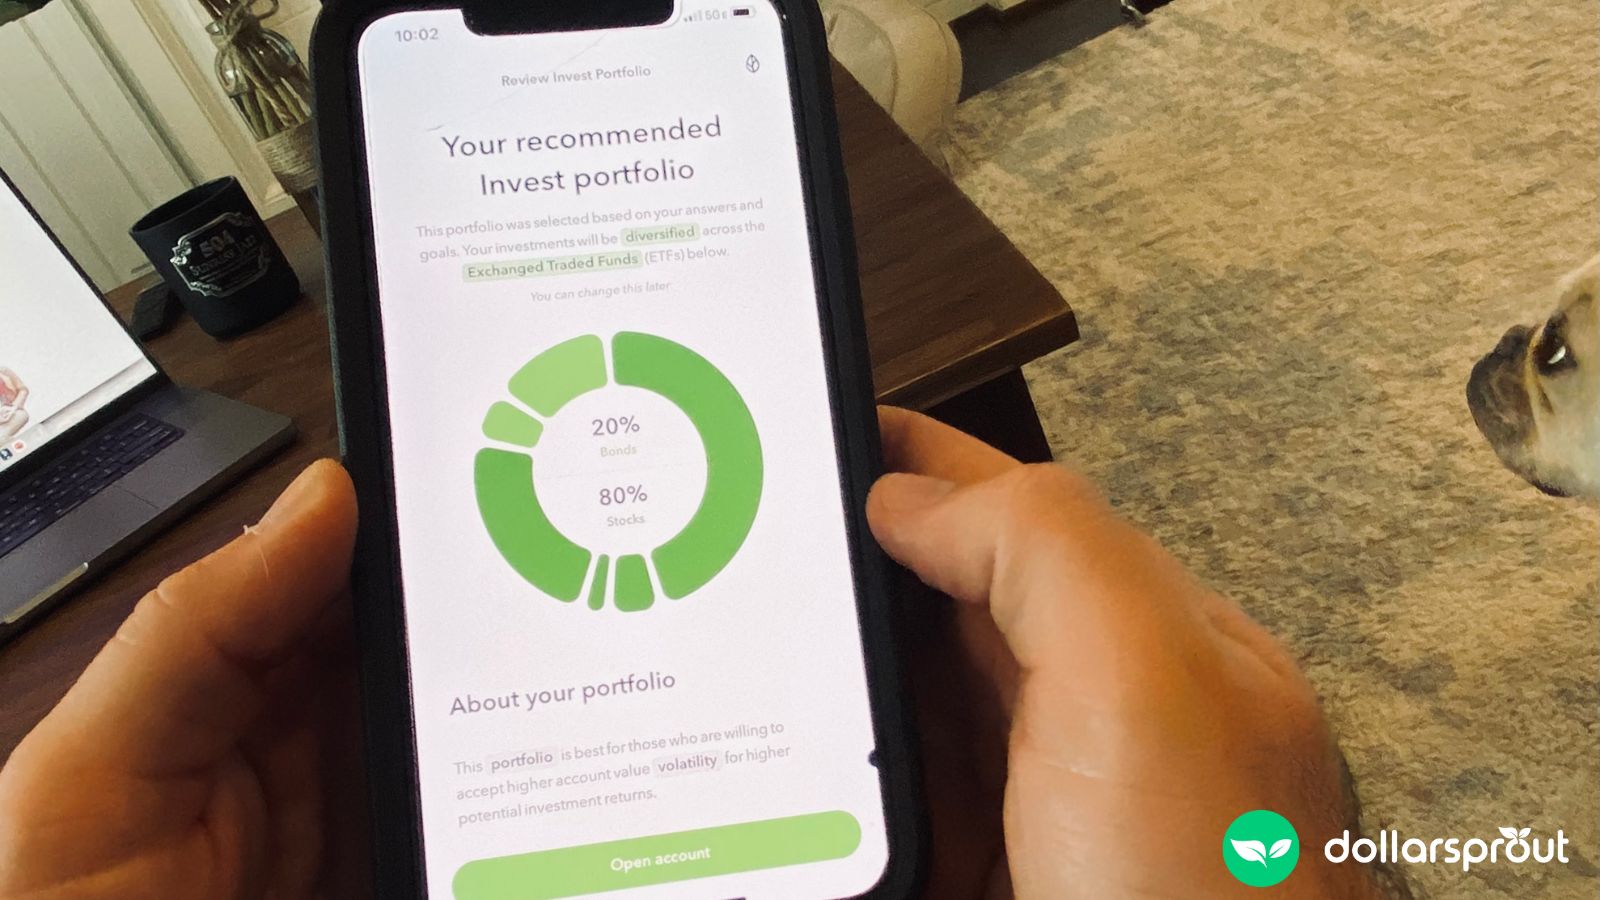 Photo showing me holding my phone with a screenshot from the Acorns app with a recommended portfolio.